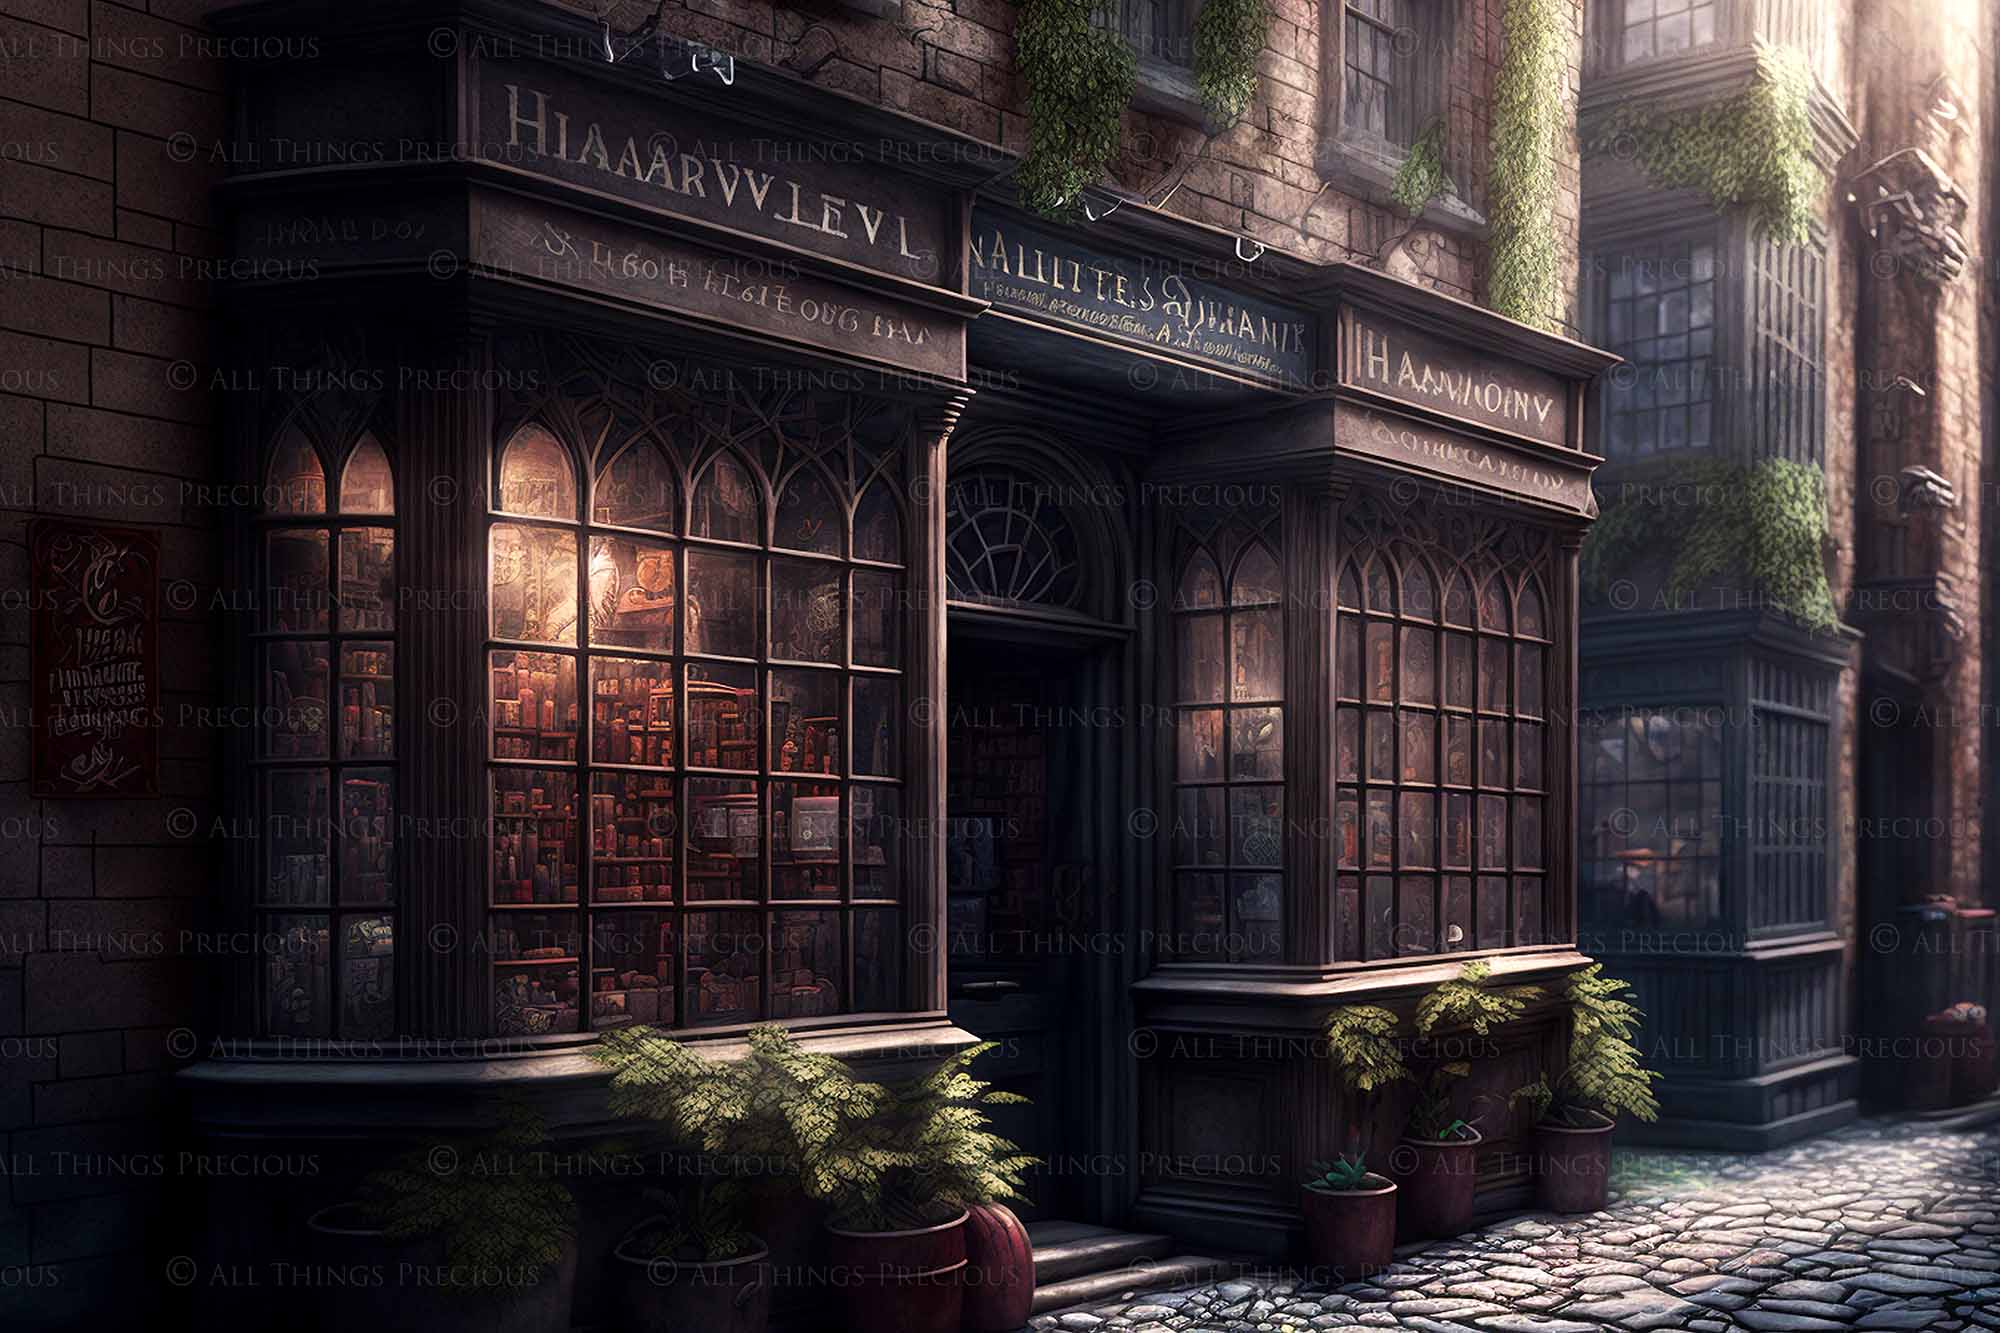 Wizard Diagon Alley digital background. High resolution harry potter themed digital backdrops made in AI. With old english shops, cobbled streets and magical lighting, these would make beautiful backdrops.